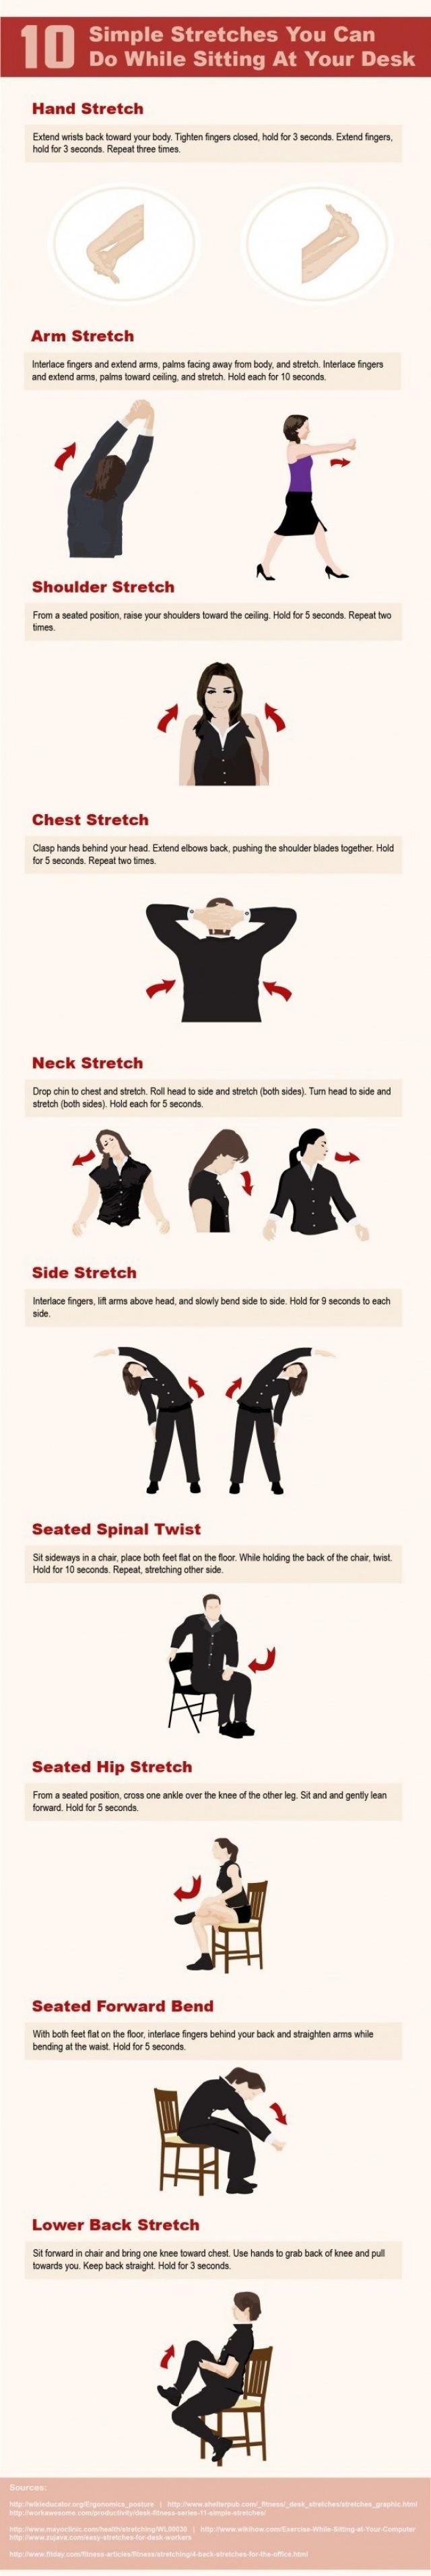 10 Simple Stretches To Do At Your Desk Infographic 2132257 Weddbook